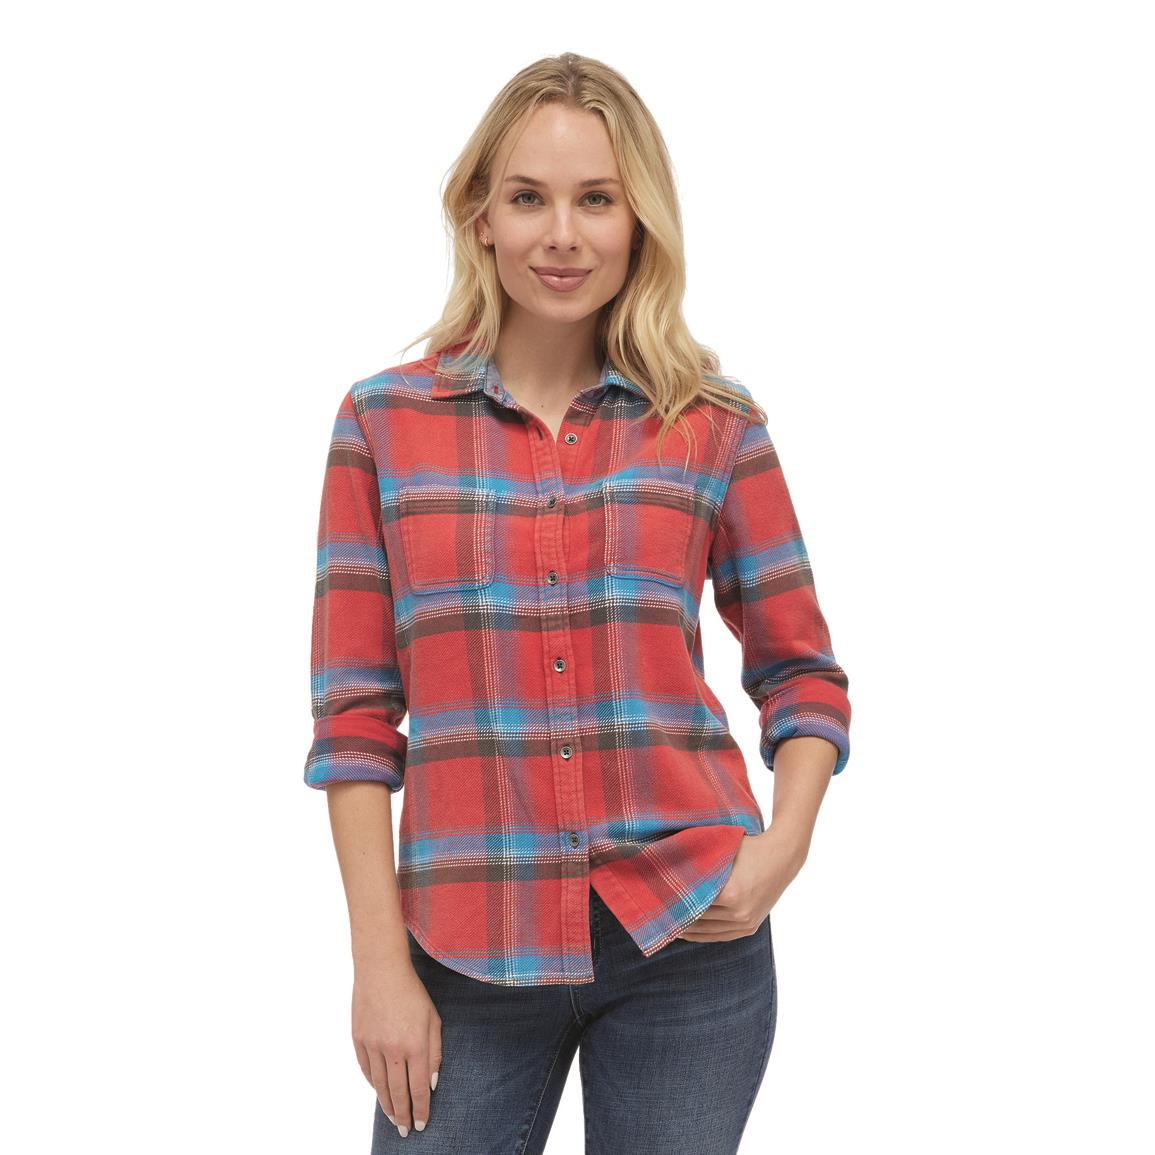 Flag & Anthem Women's Larkspur Relaxed Flannel Shirt, Red/blue/charcoal